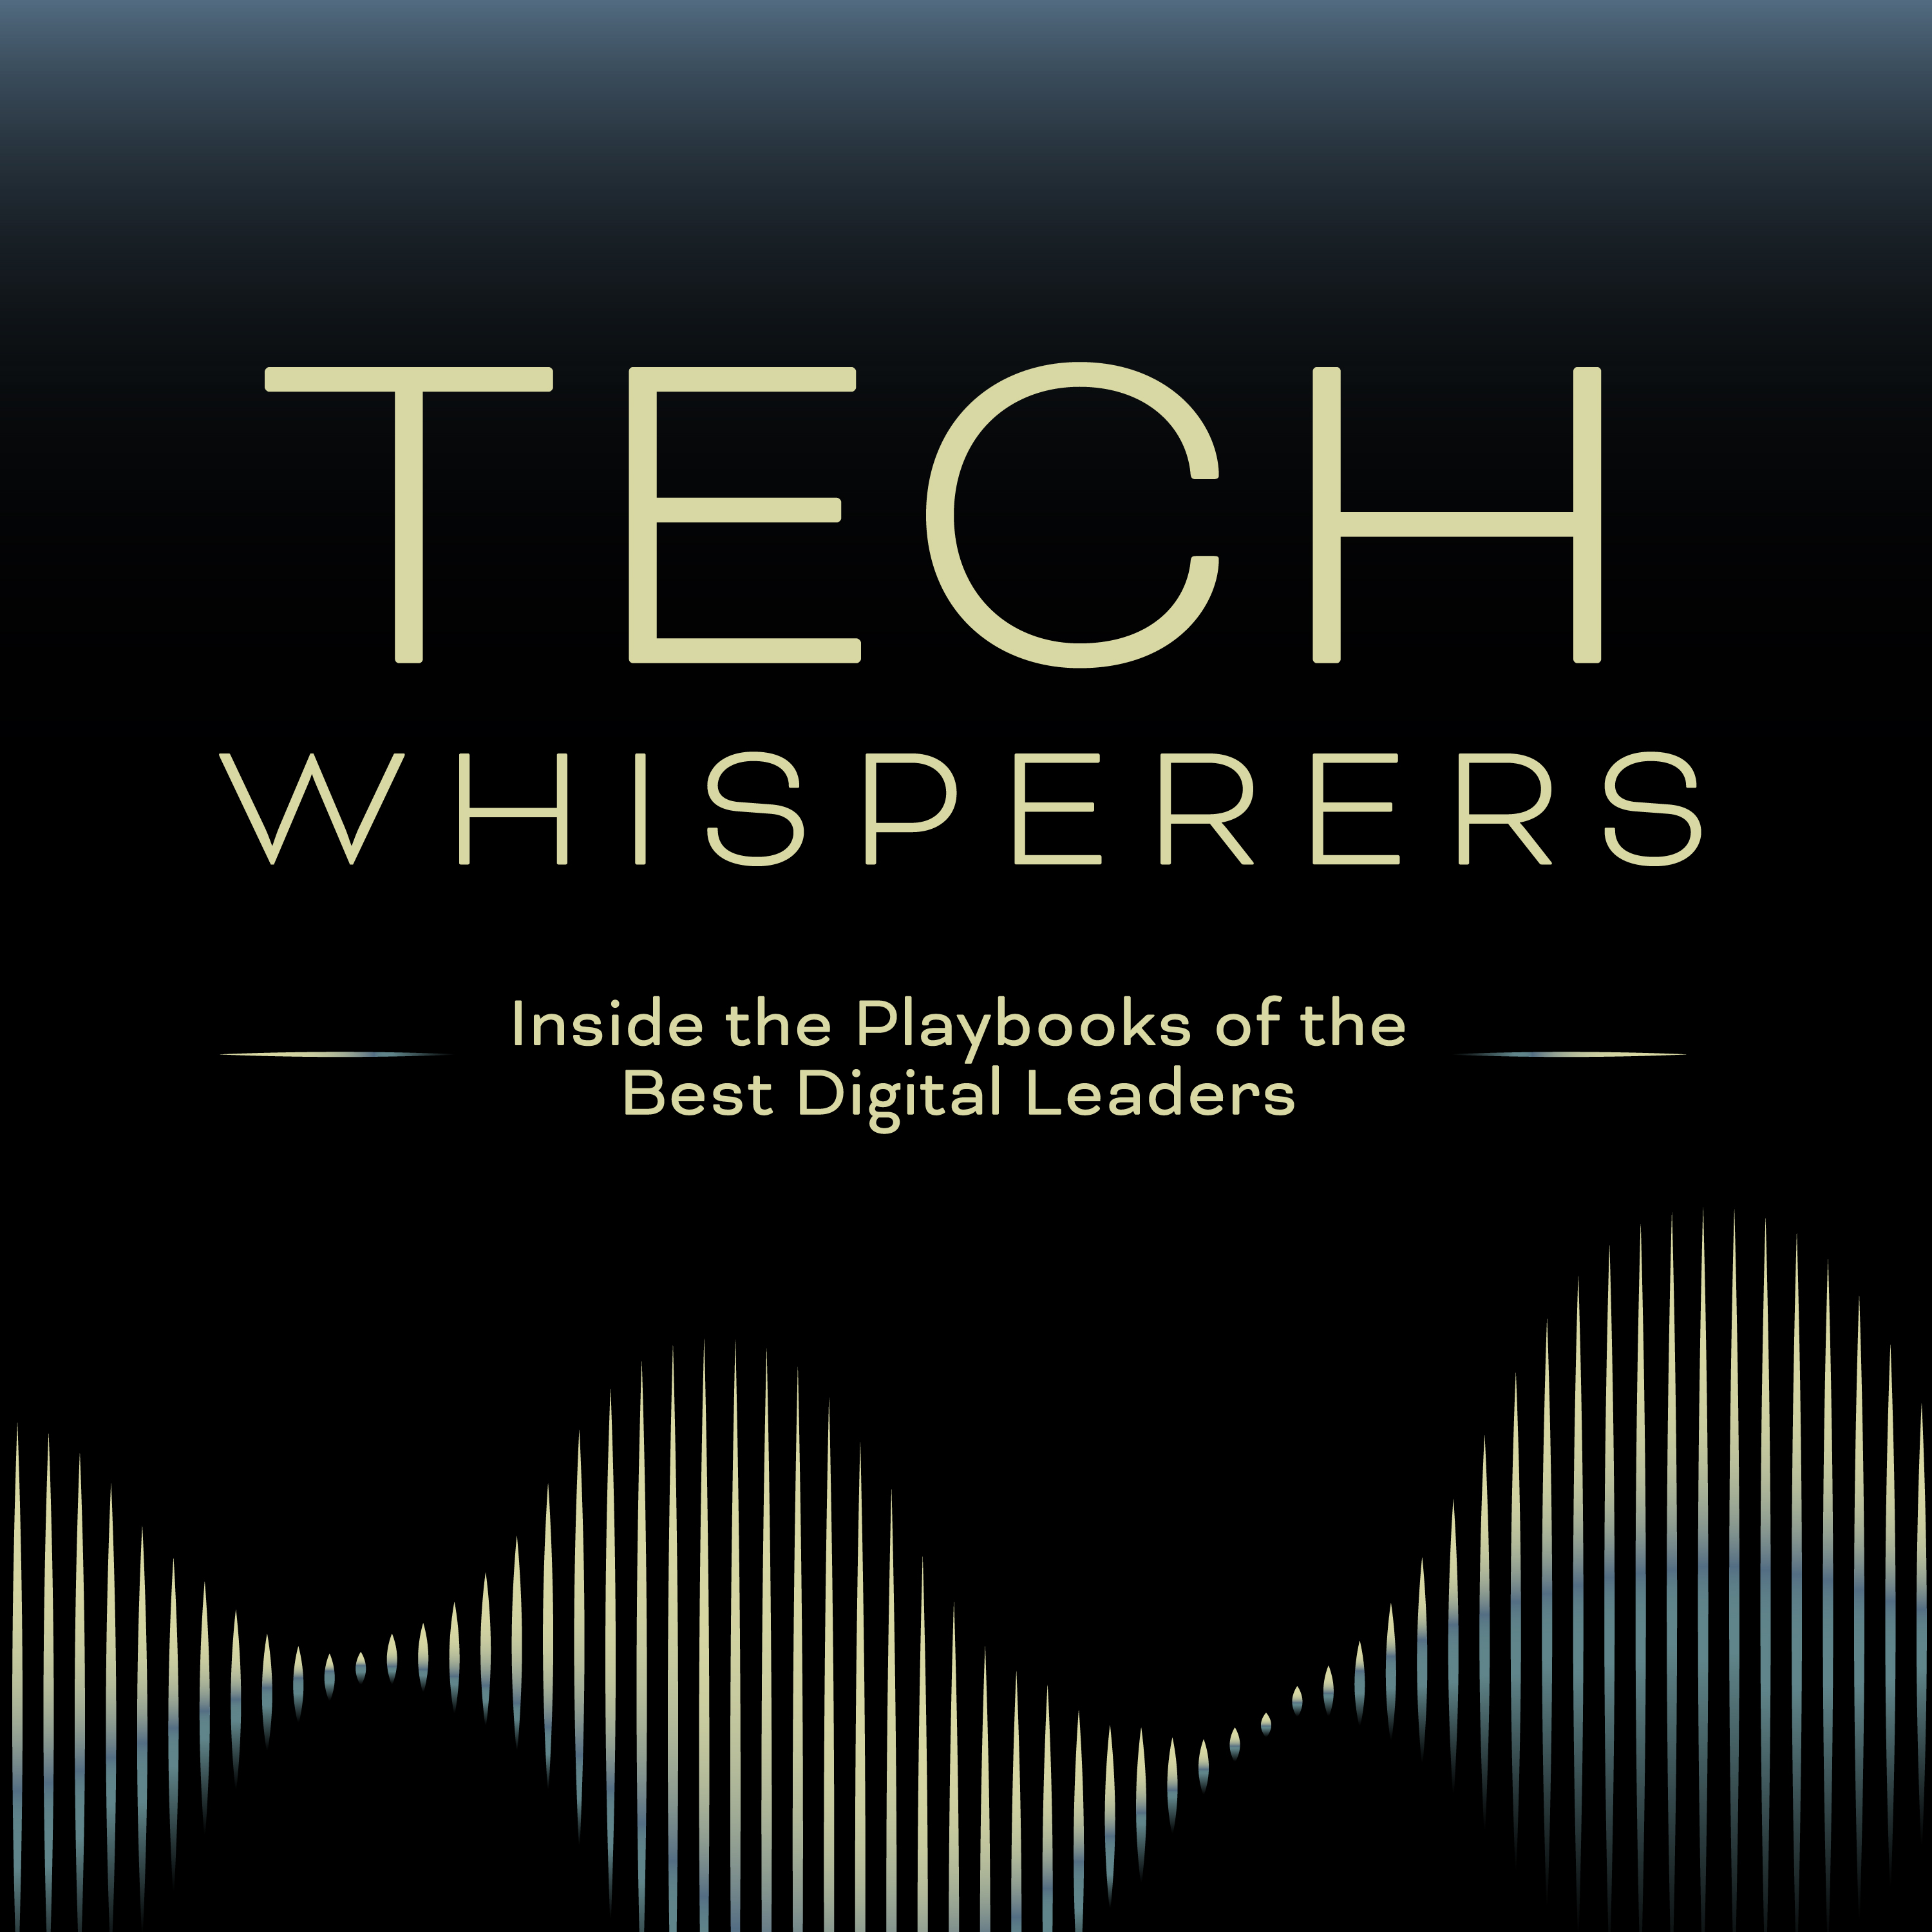 Inside the Playbooks of the Best Digital Leaders